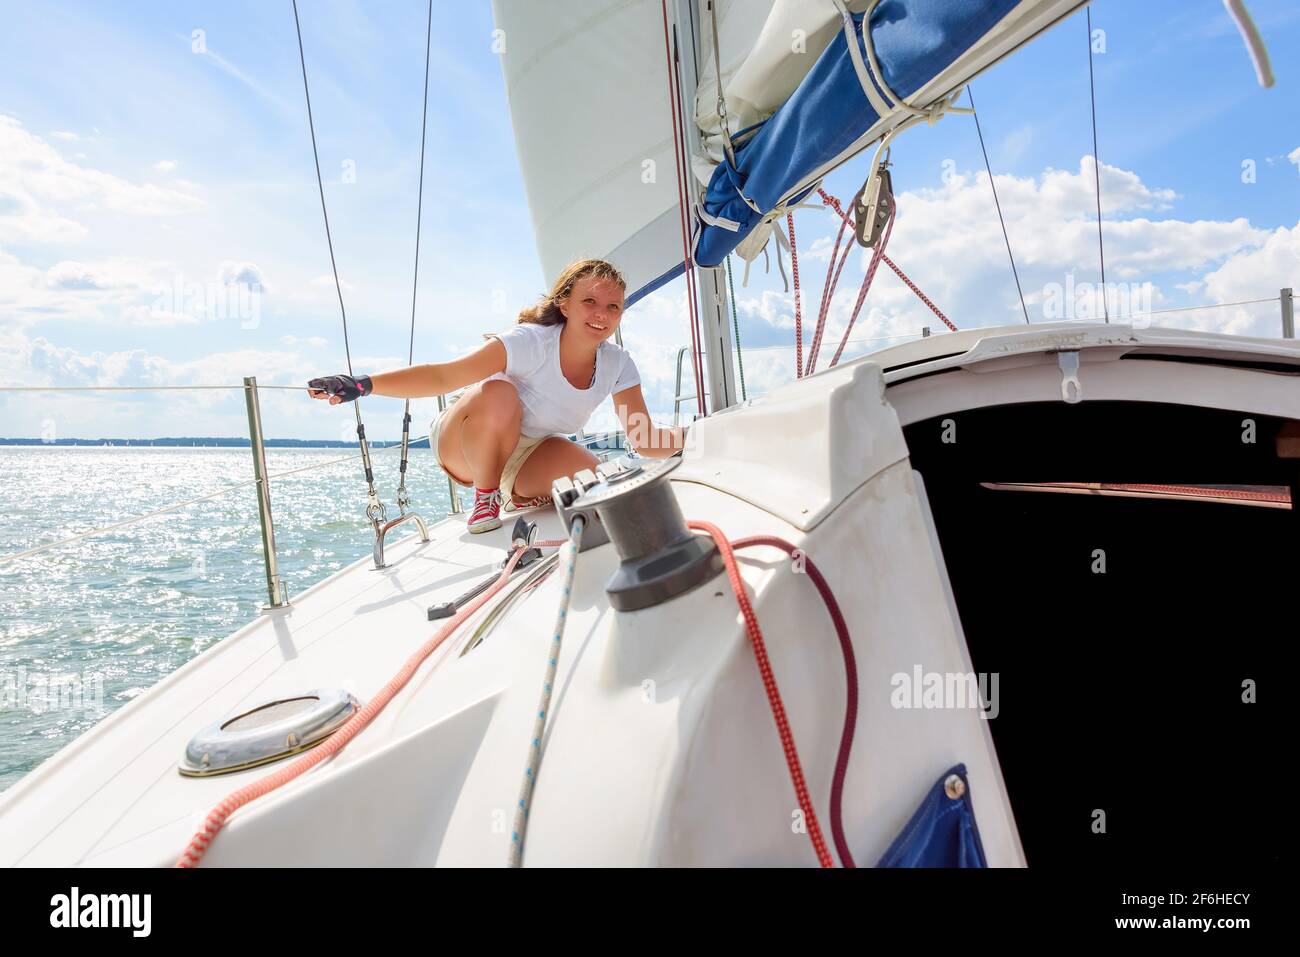 Young woman sailing on a yacht. Female sailboat crewmember trimming main sail during sail on vacation in summer season Stock Photo